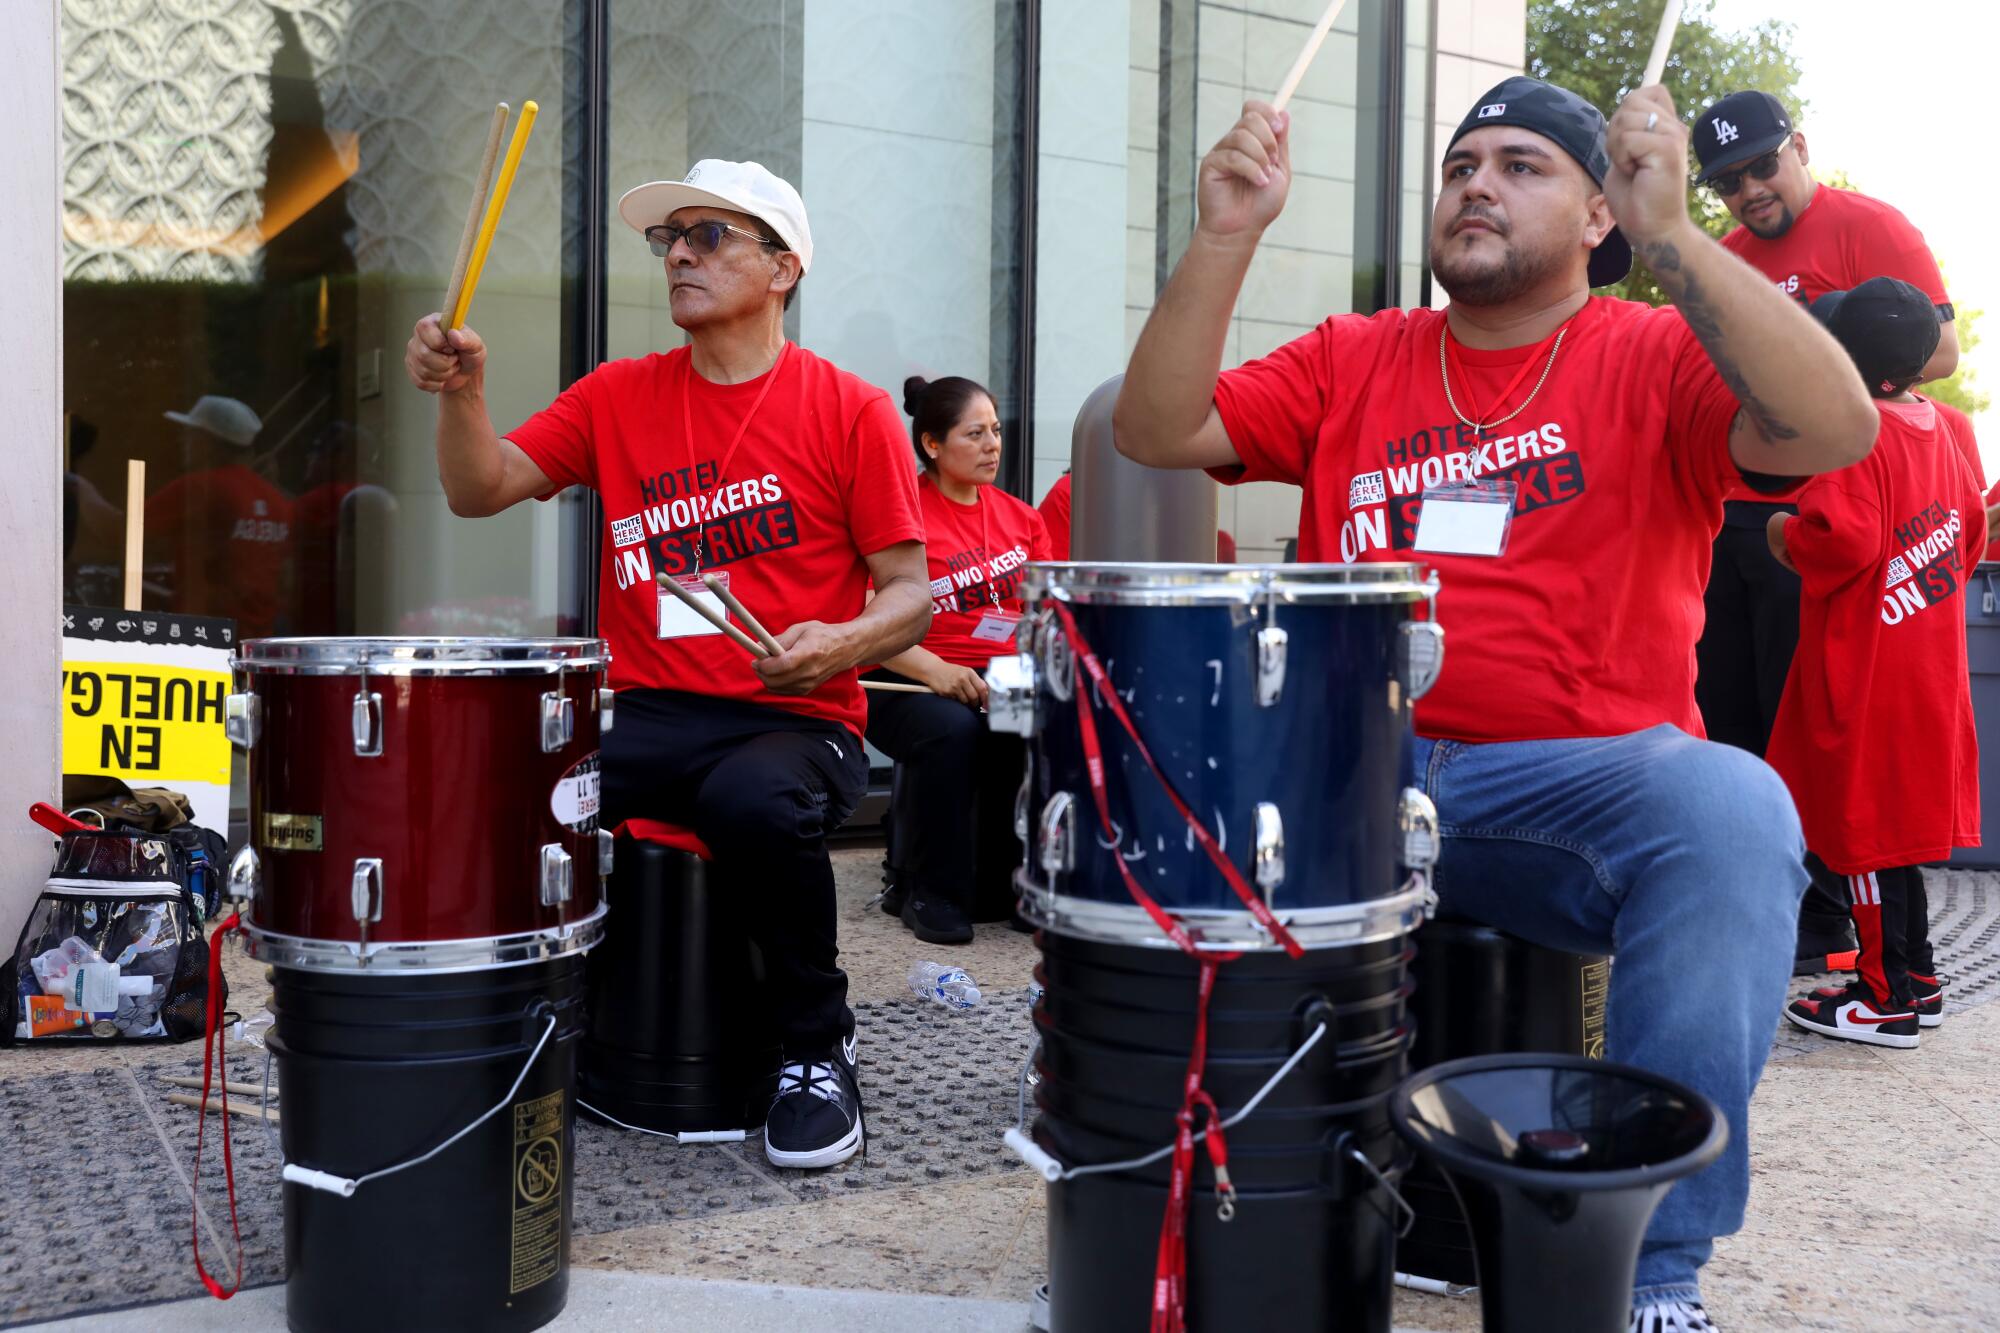 Striking hotel workers pound drums at the Waldorf Astoria on July 24